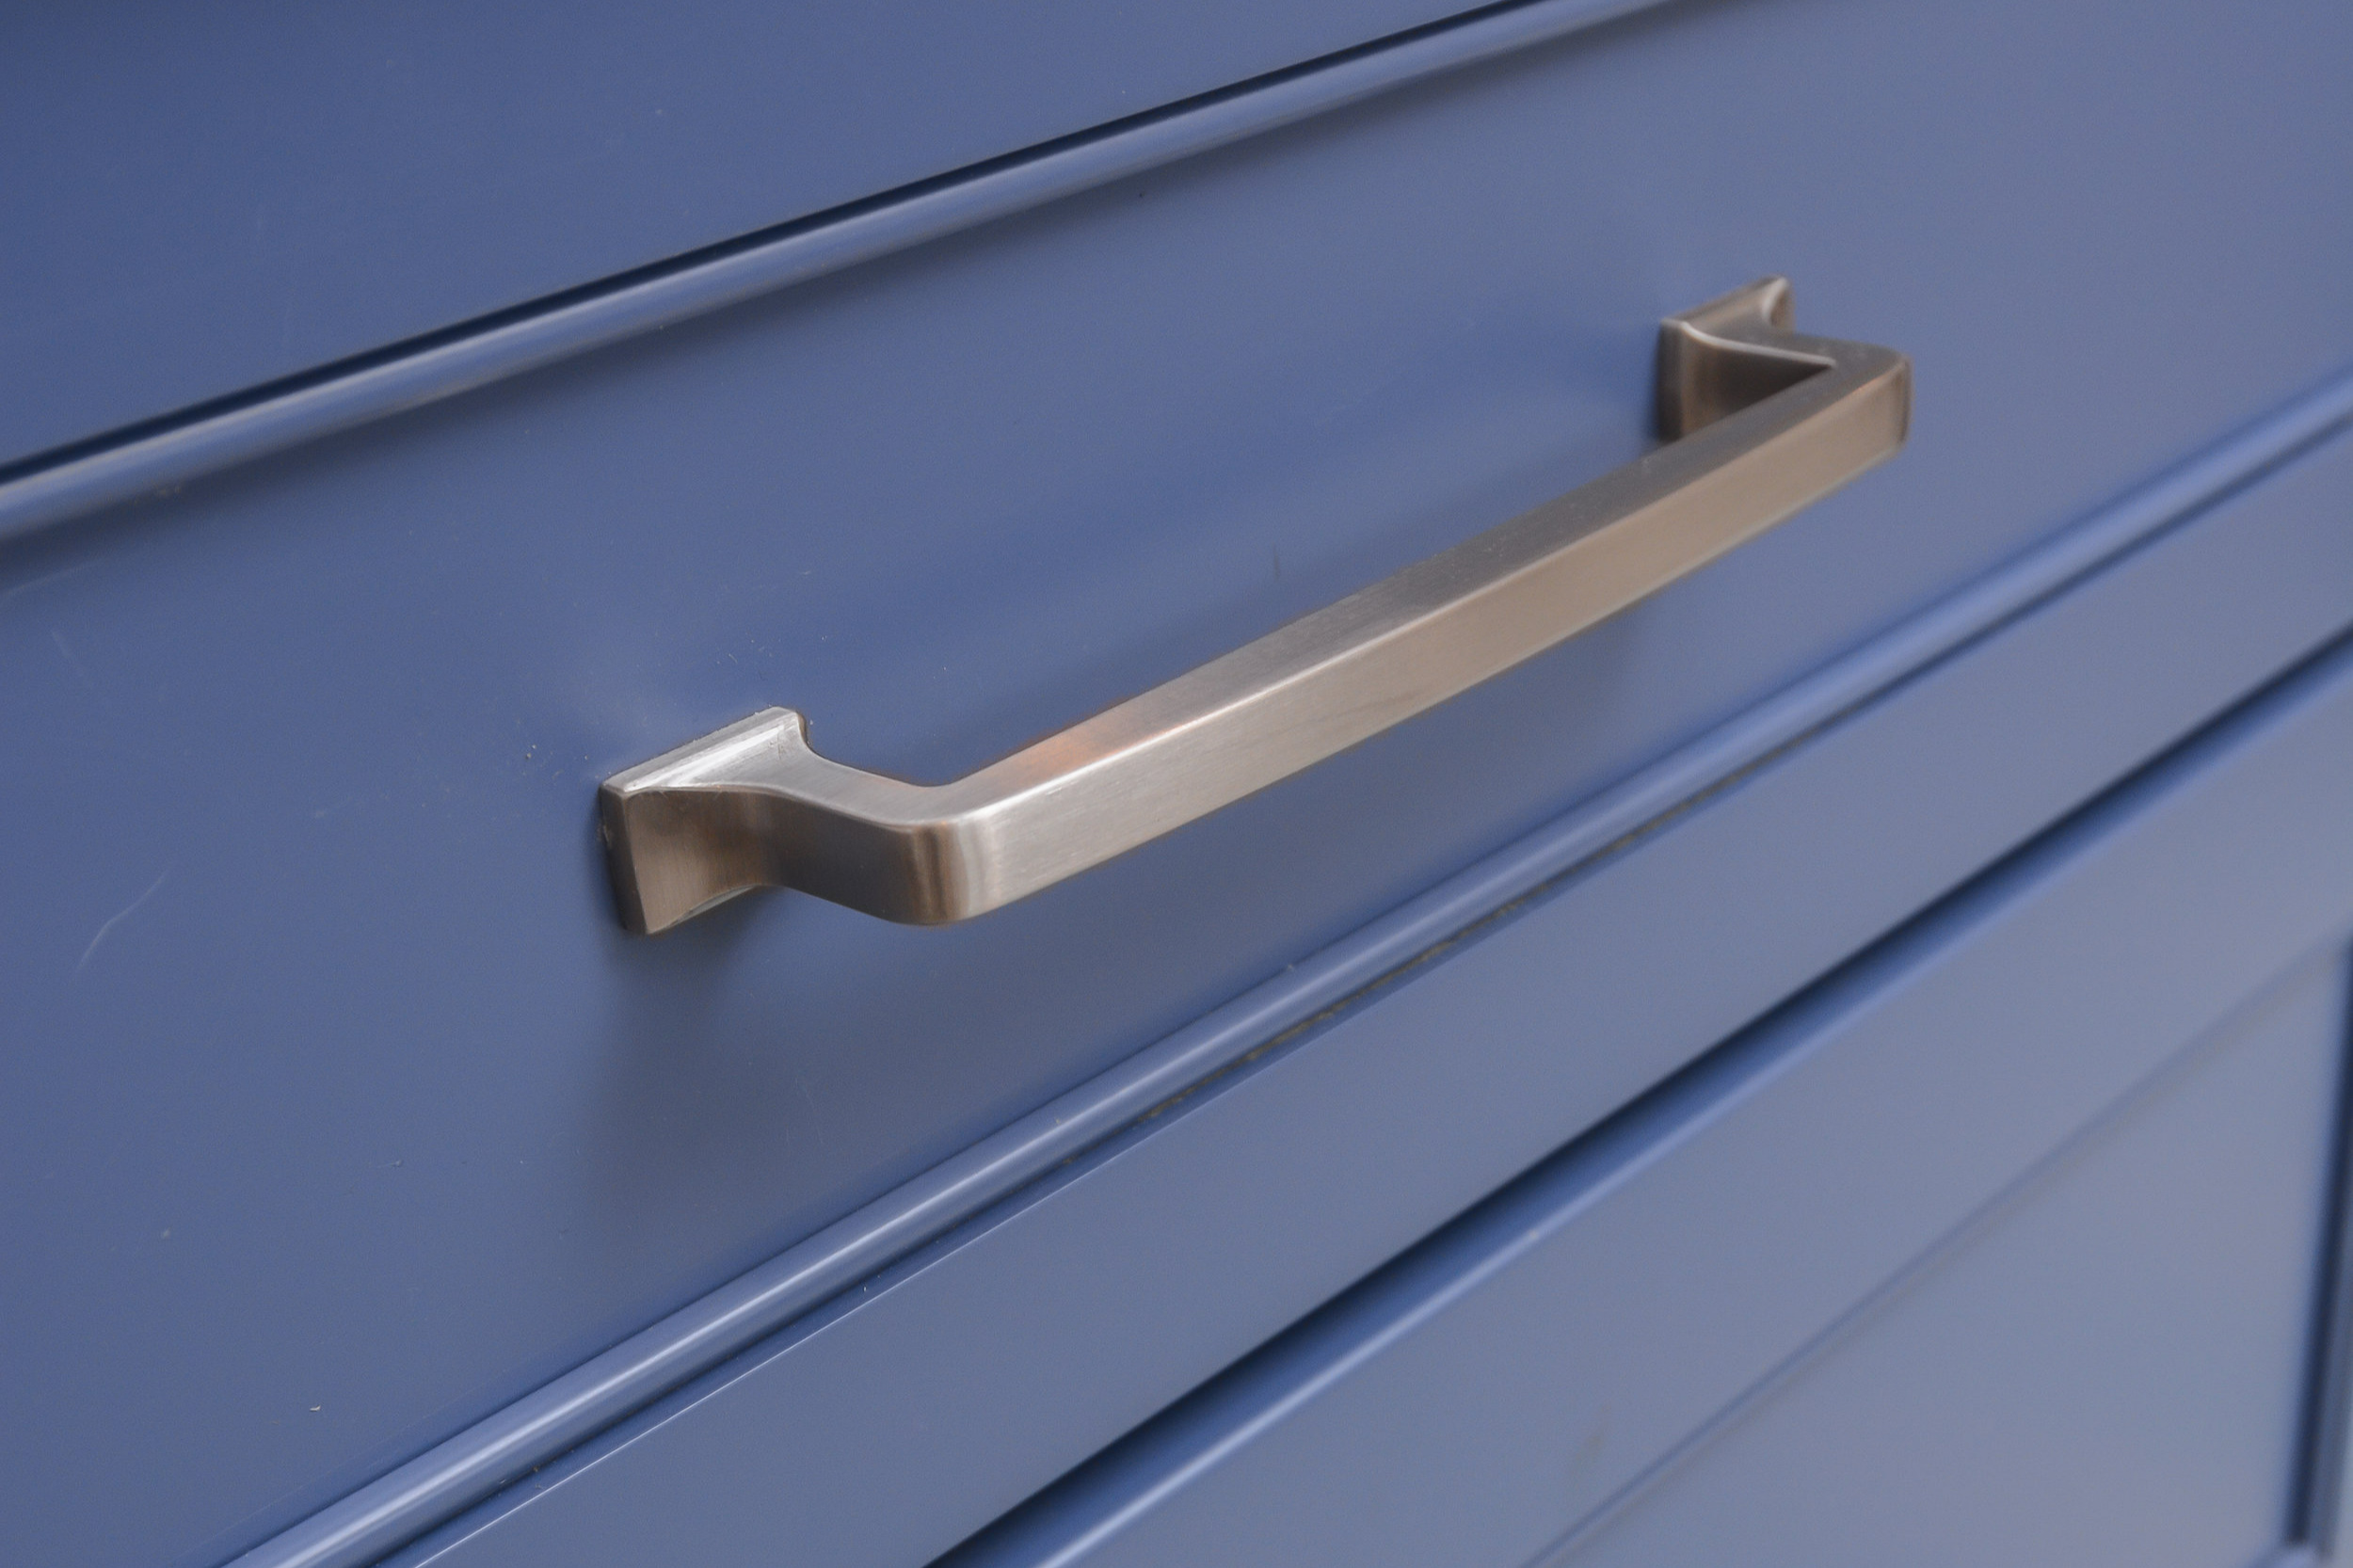 Drawer fronts match cabinet doors